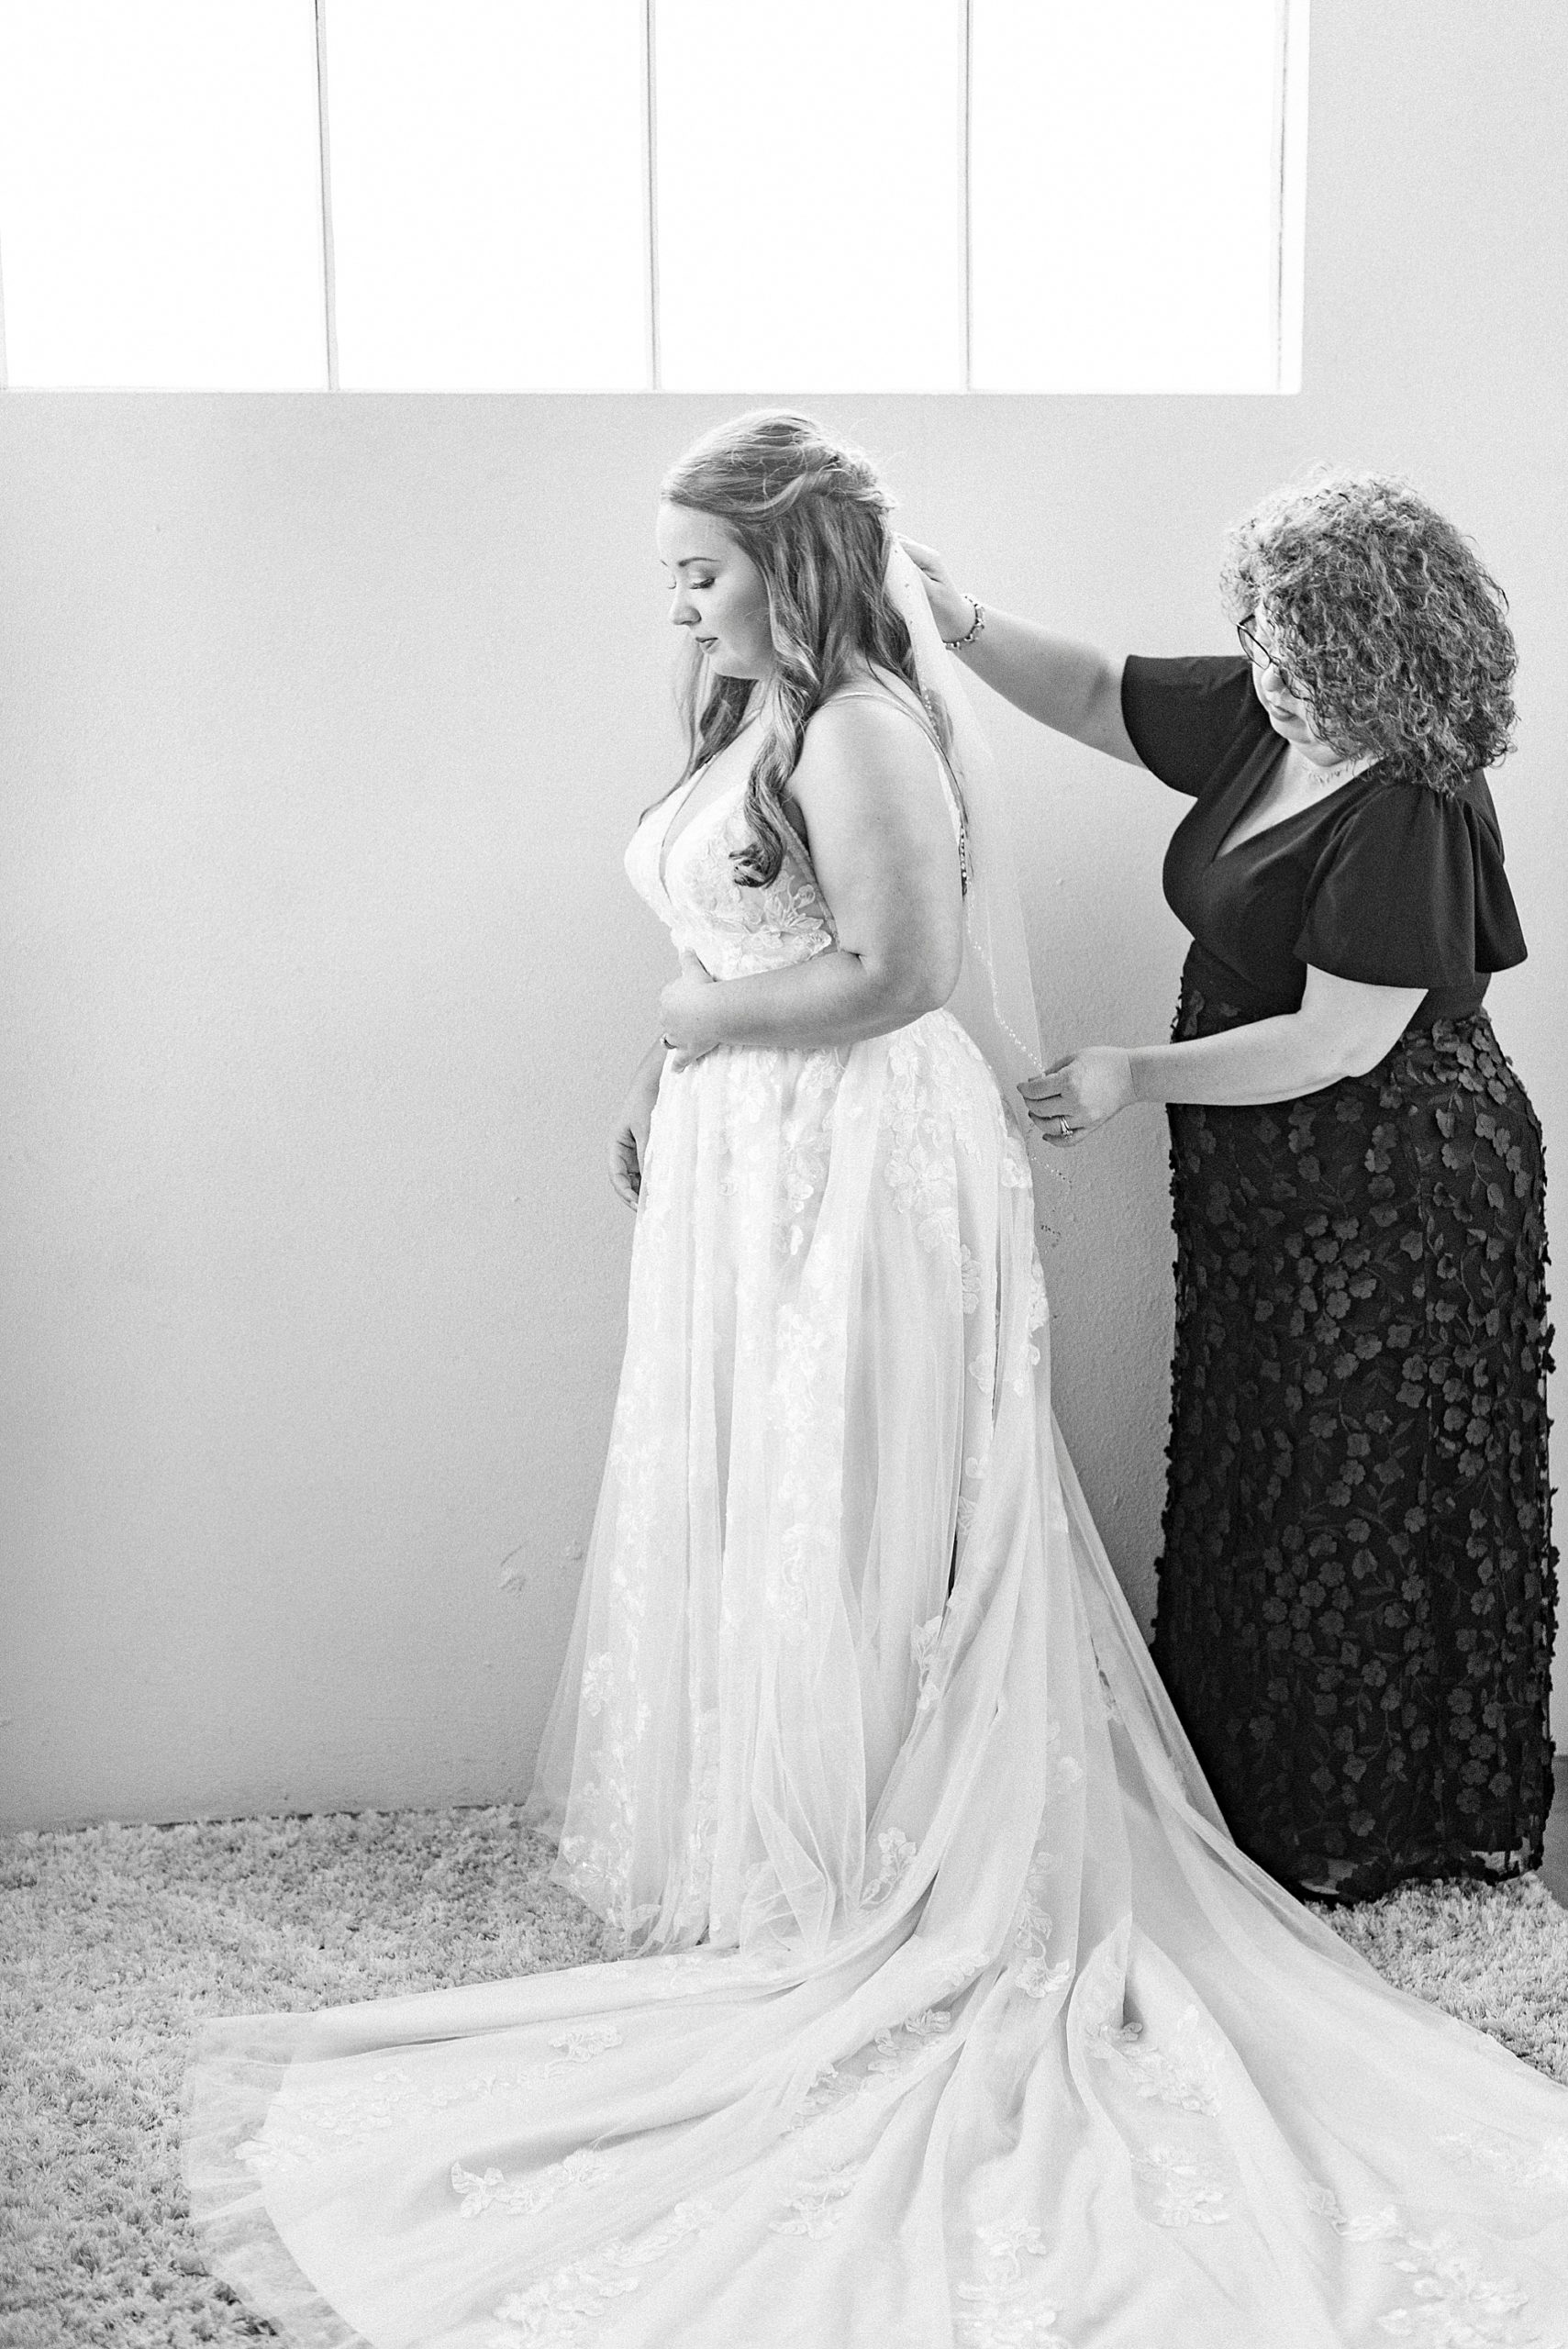 mother helps bride with veil during wedding prep